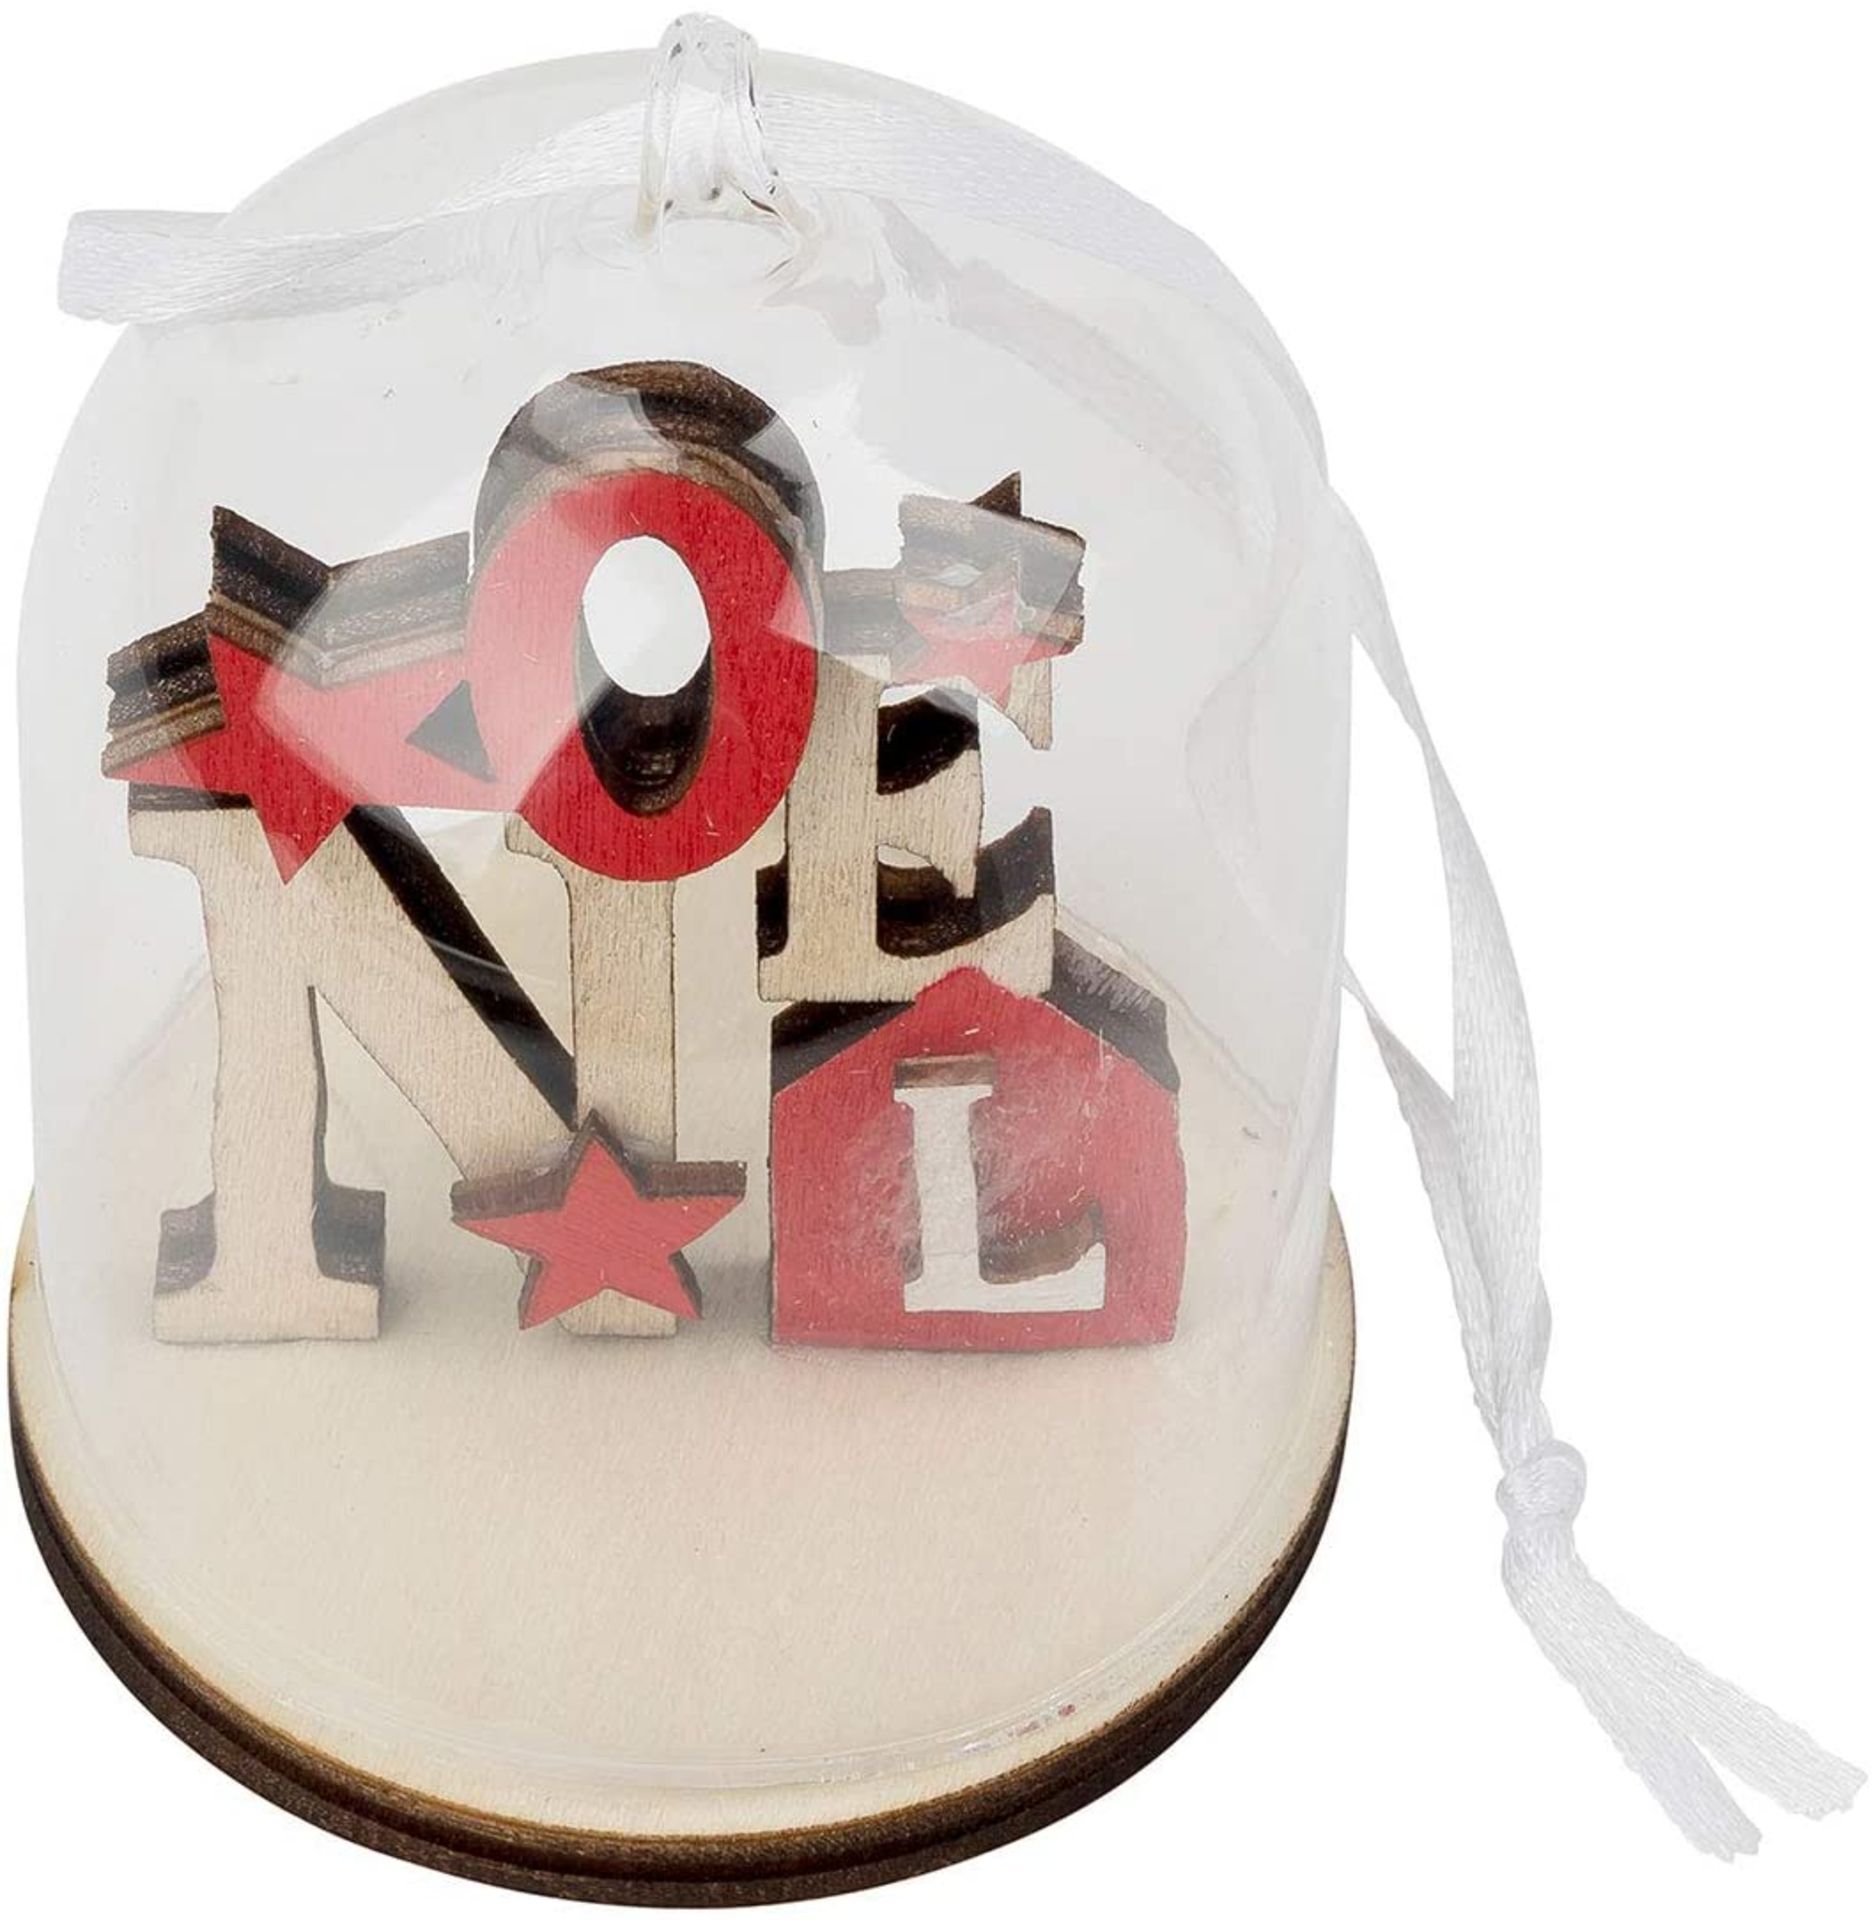 6 x Small Glass Dome & Wood Christmas Decoration (Red Tones Noel) - Image 6 of 7